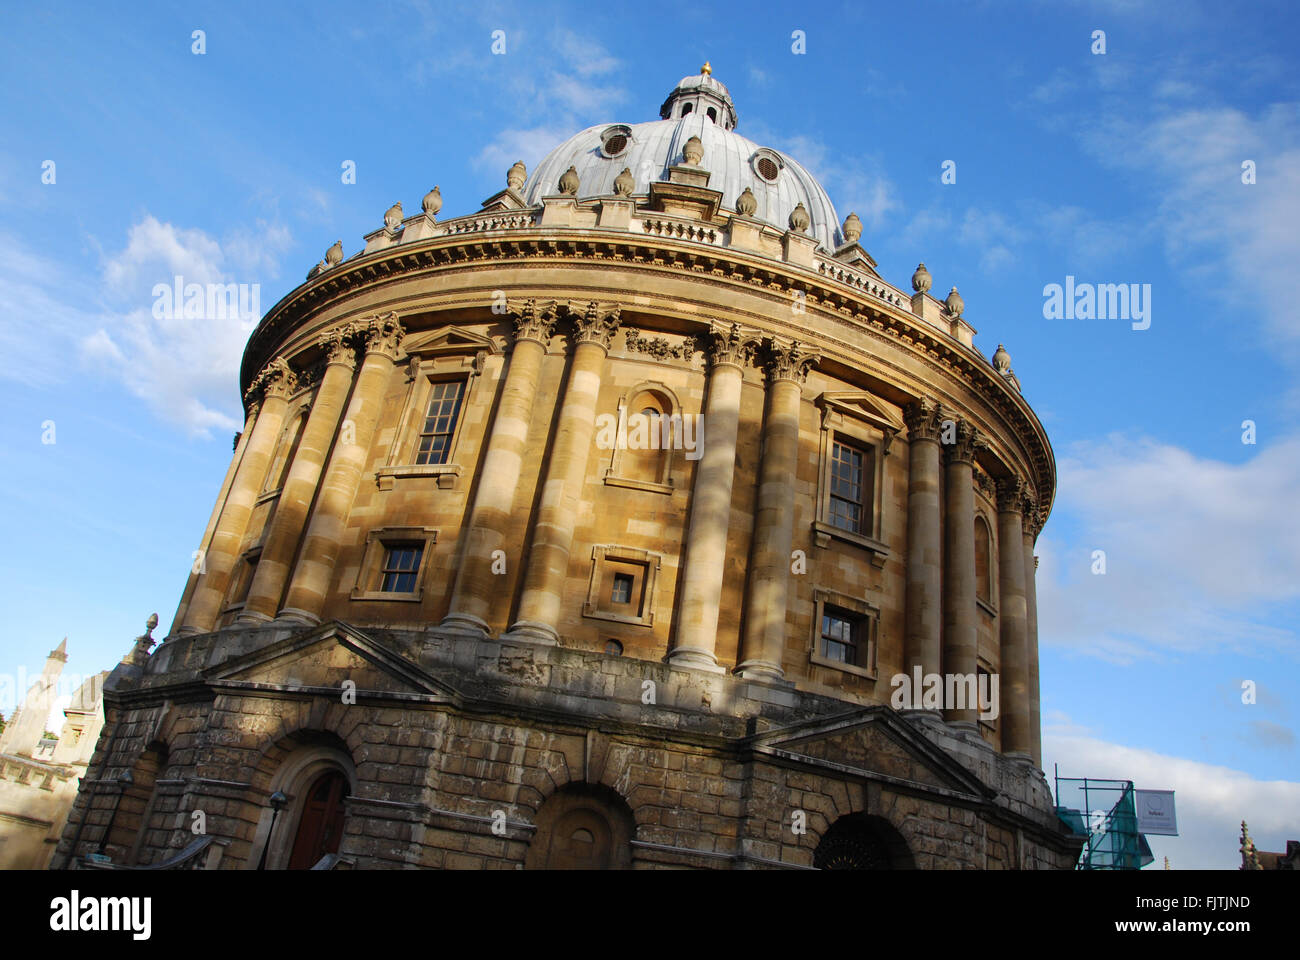 Radcliffe Camera Oxford Royaume-Uni Banque D'Images